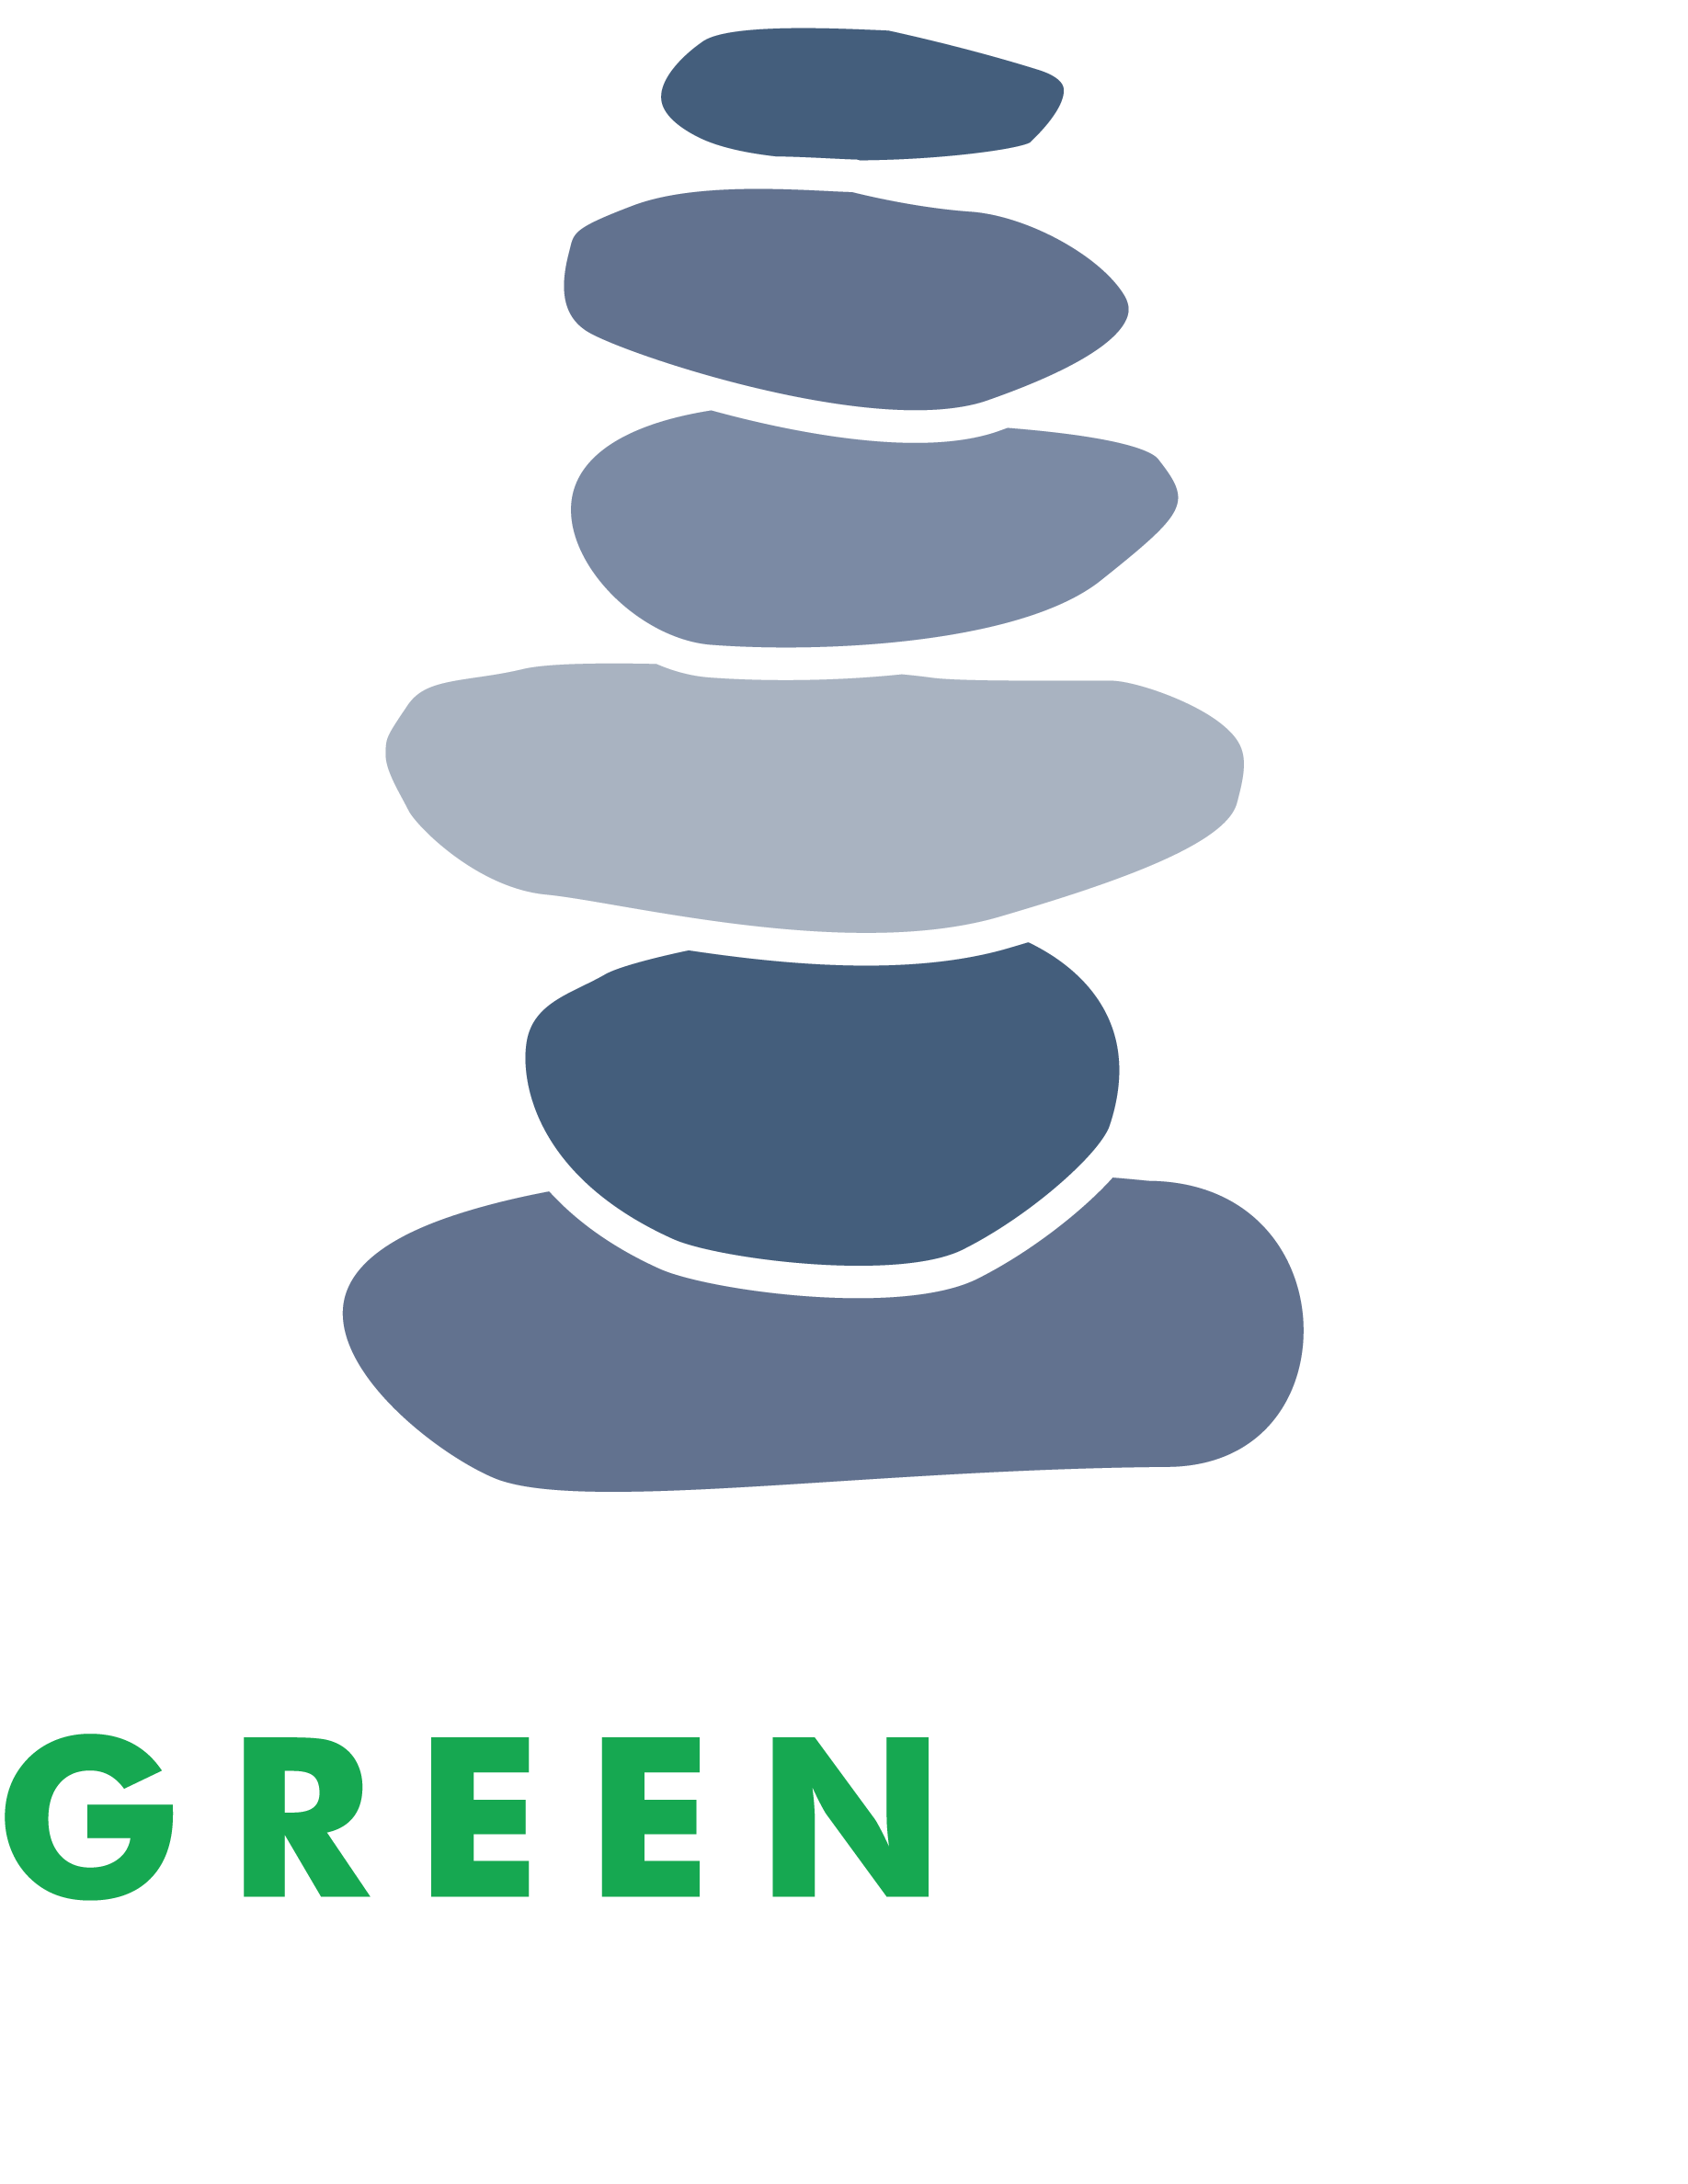 land clipart greenfield